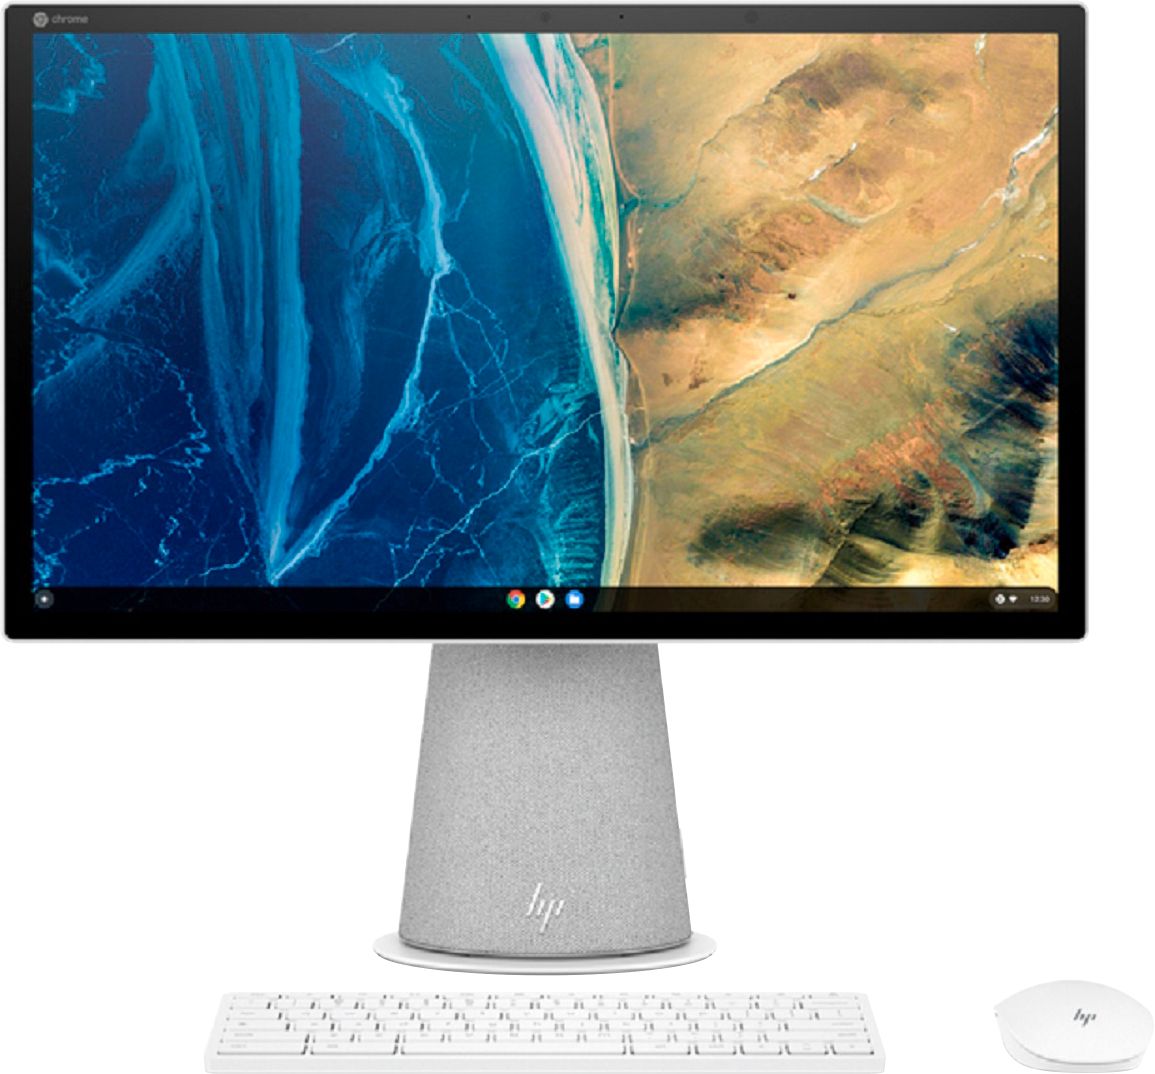 HP - Chromebase 21.5" Touch-Screen All-In-One - Intel Pentium Gold - 4GB Memory - 64GB eMMC